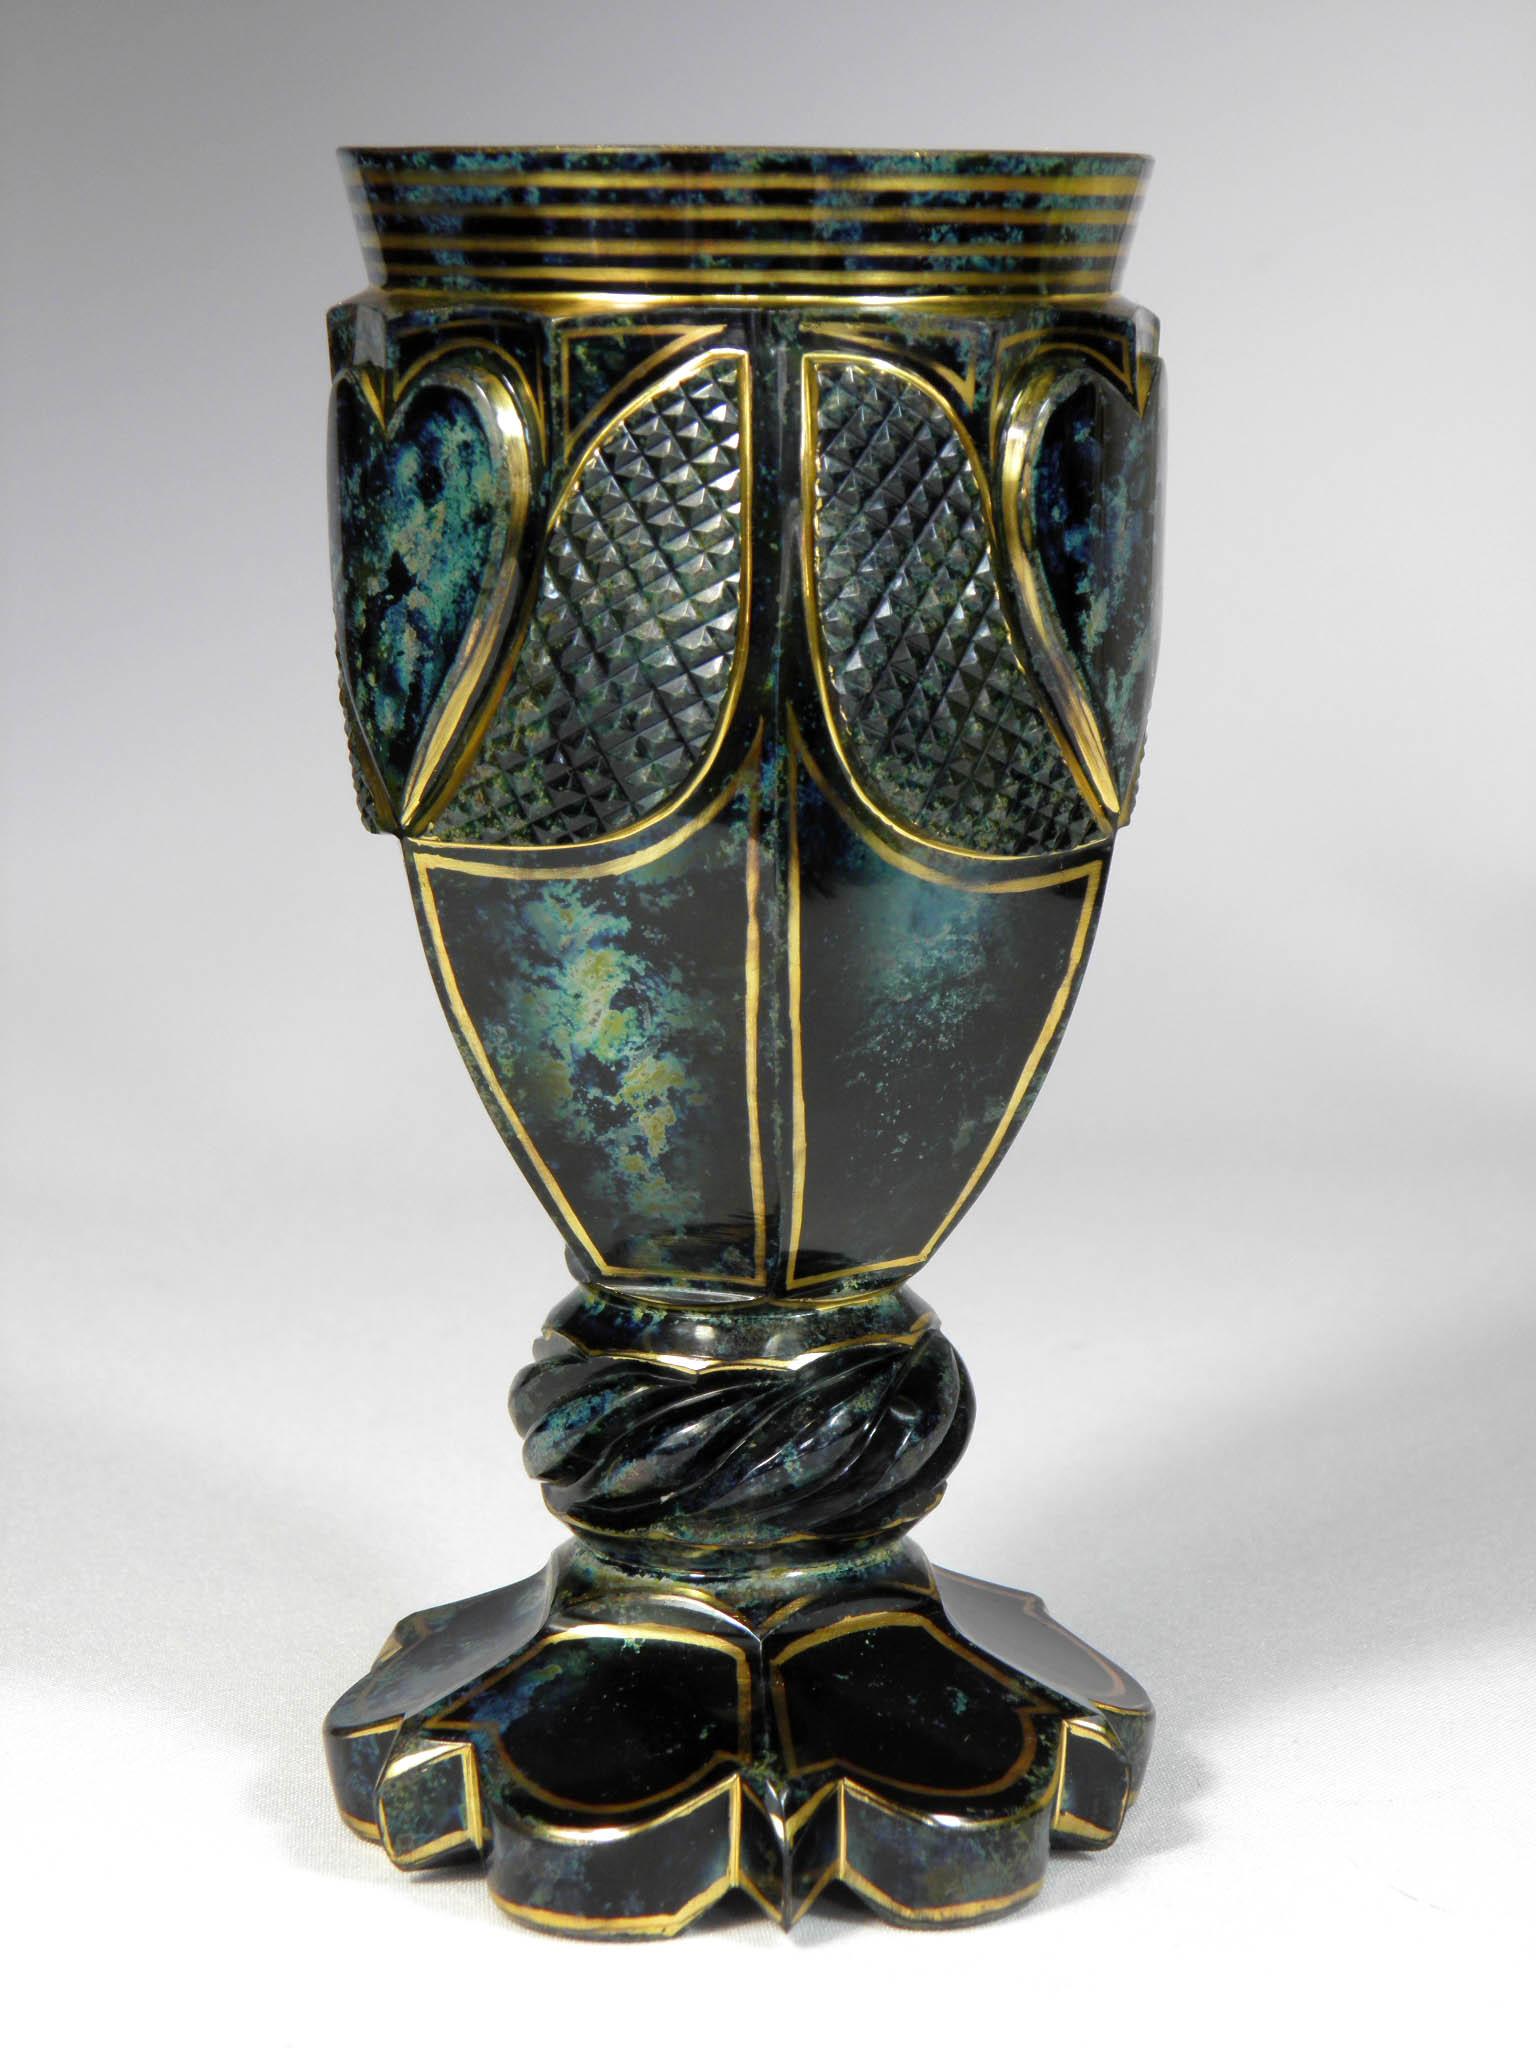 Beautifully cut goblet made of marble glass, marble glass is unique in its form of semi-precious stone or marble, Bedrich Egermann became famous for this production of marbled and lityalin glass in the 19th century, After him, the production of this